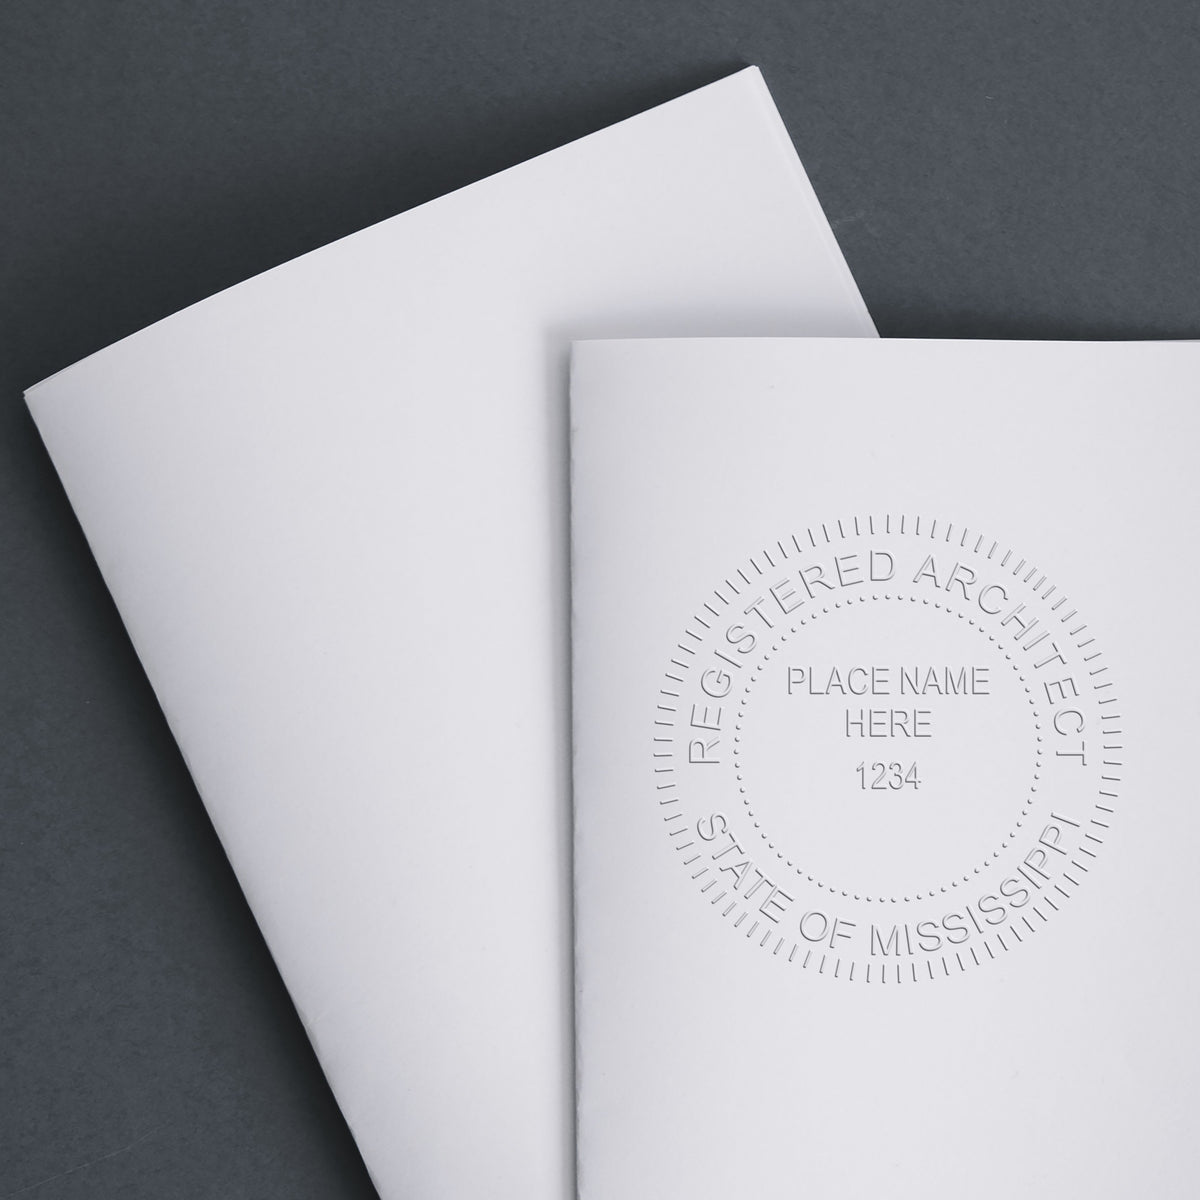 This paper is stamped with a sample imprint of the Handheld Mississippi Architect Seal Embosser, signifying its quality and reliability.